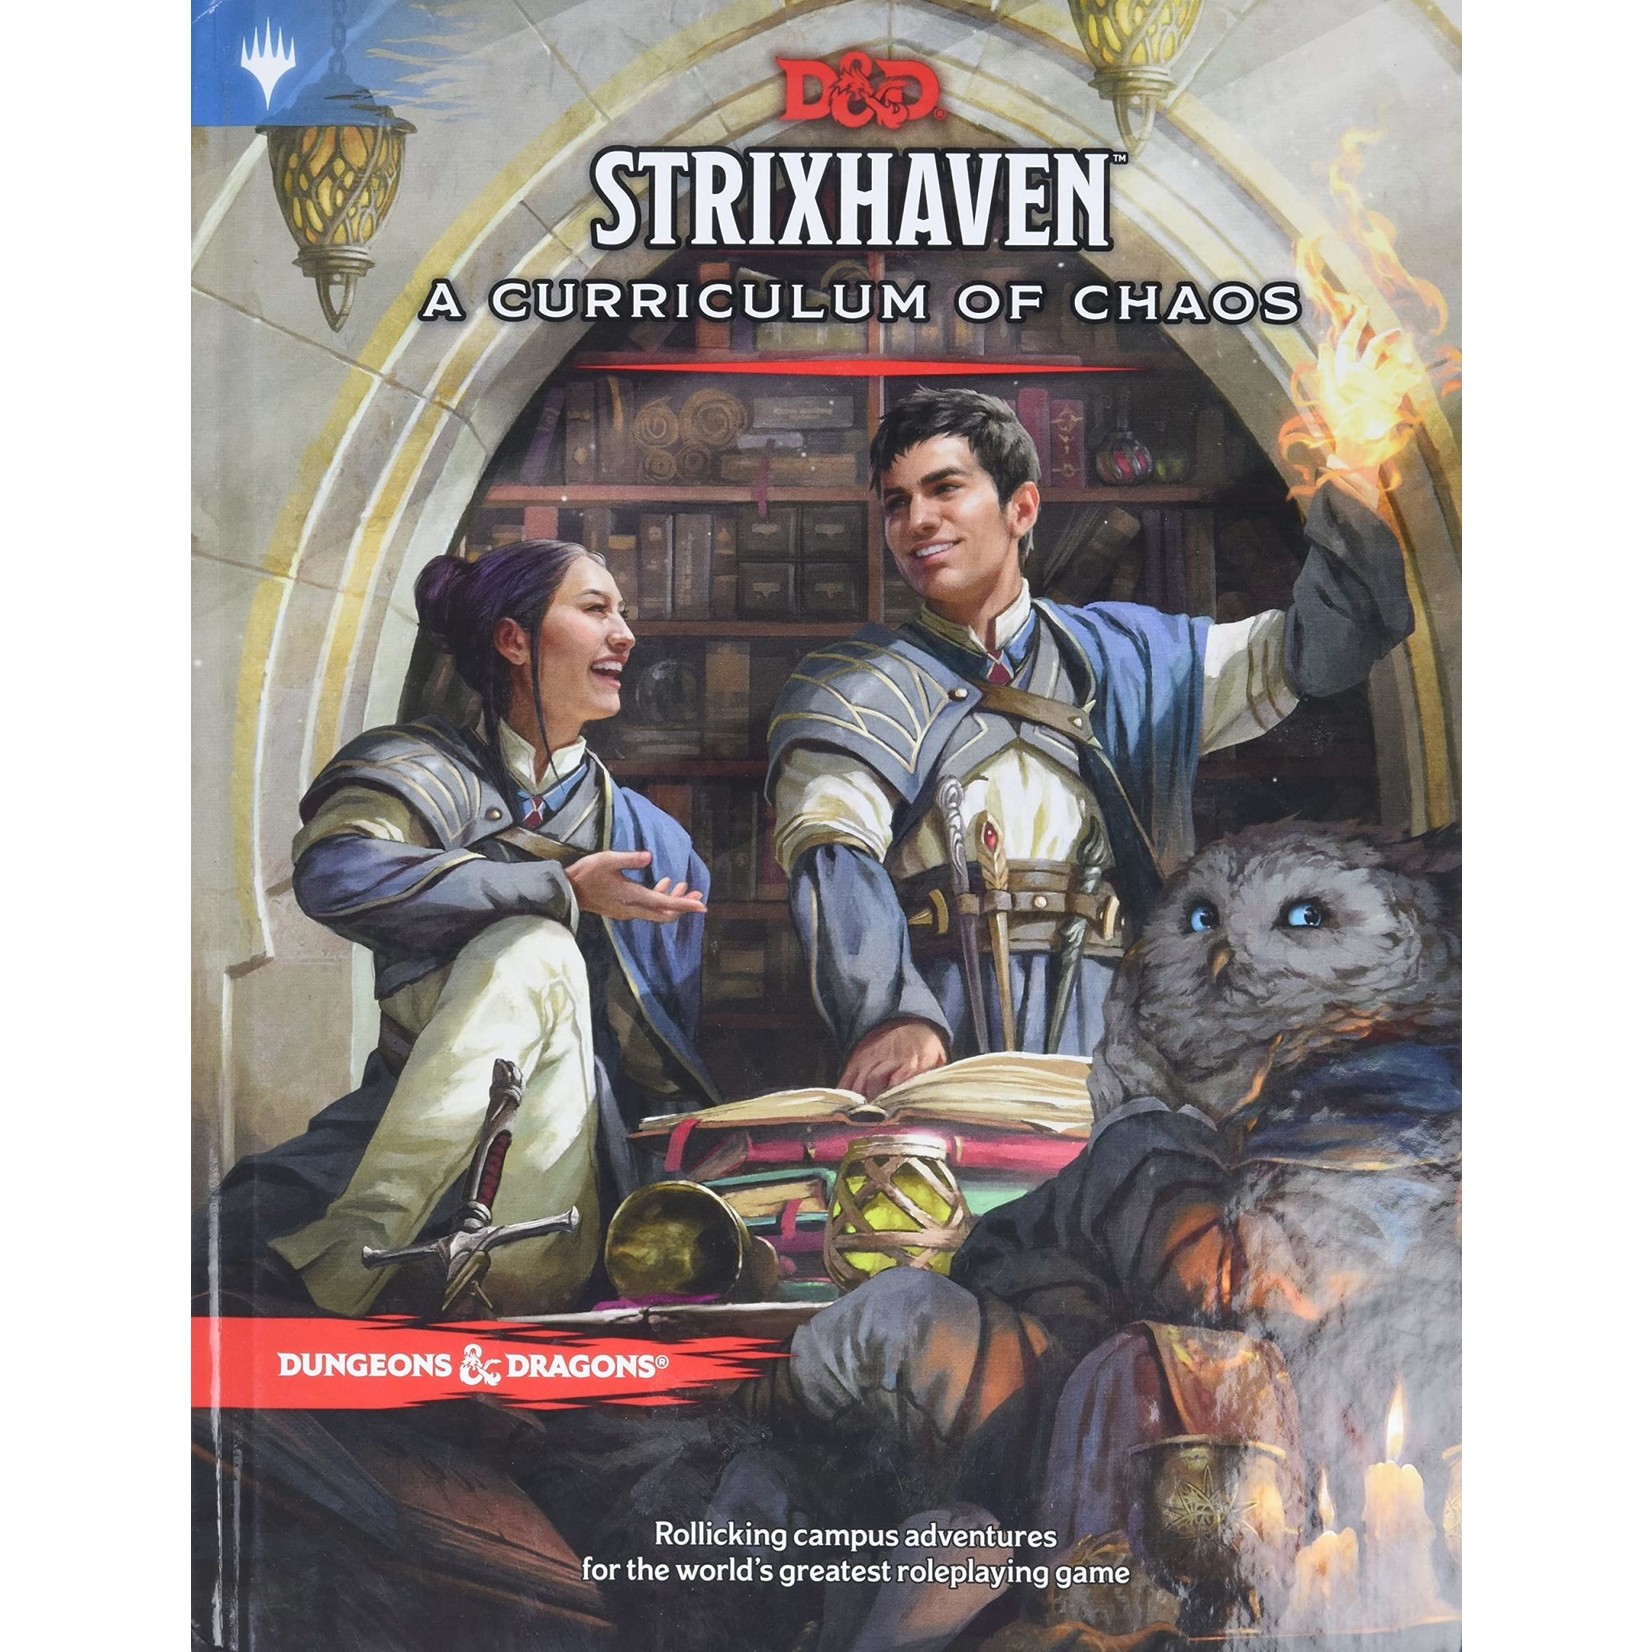 Wizards of the Coast Dungeons & Dragons 5E Strixhaven Curriculum of Chaos